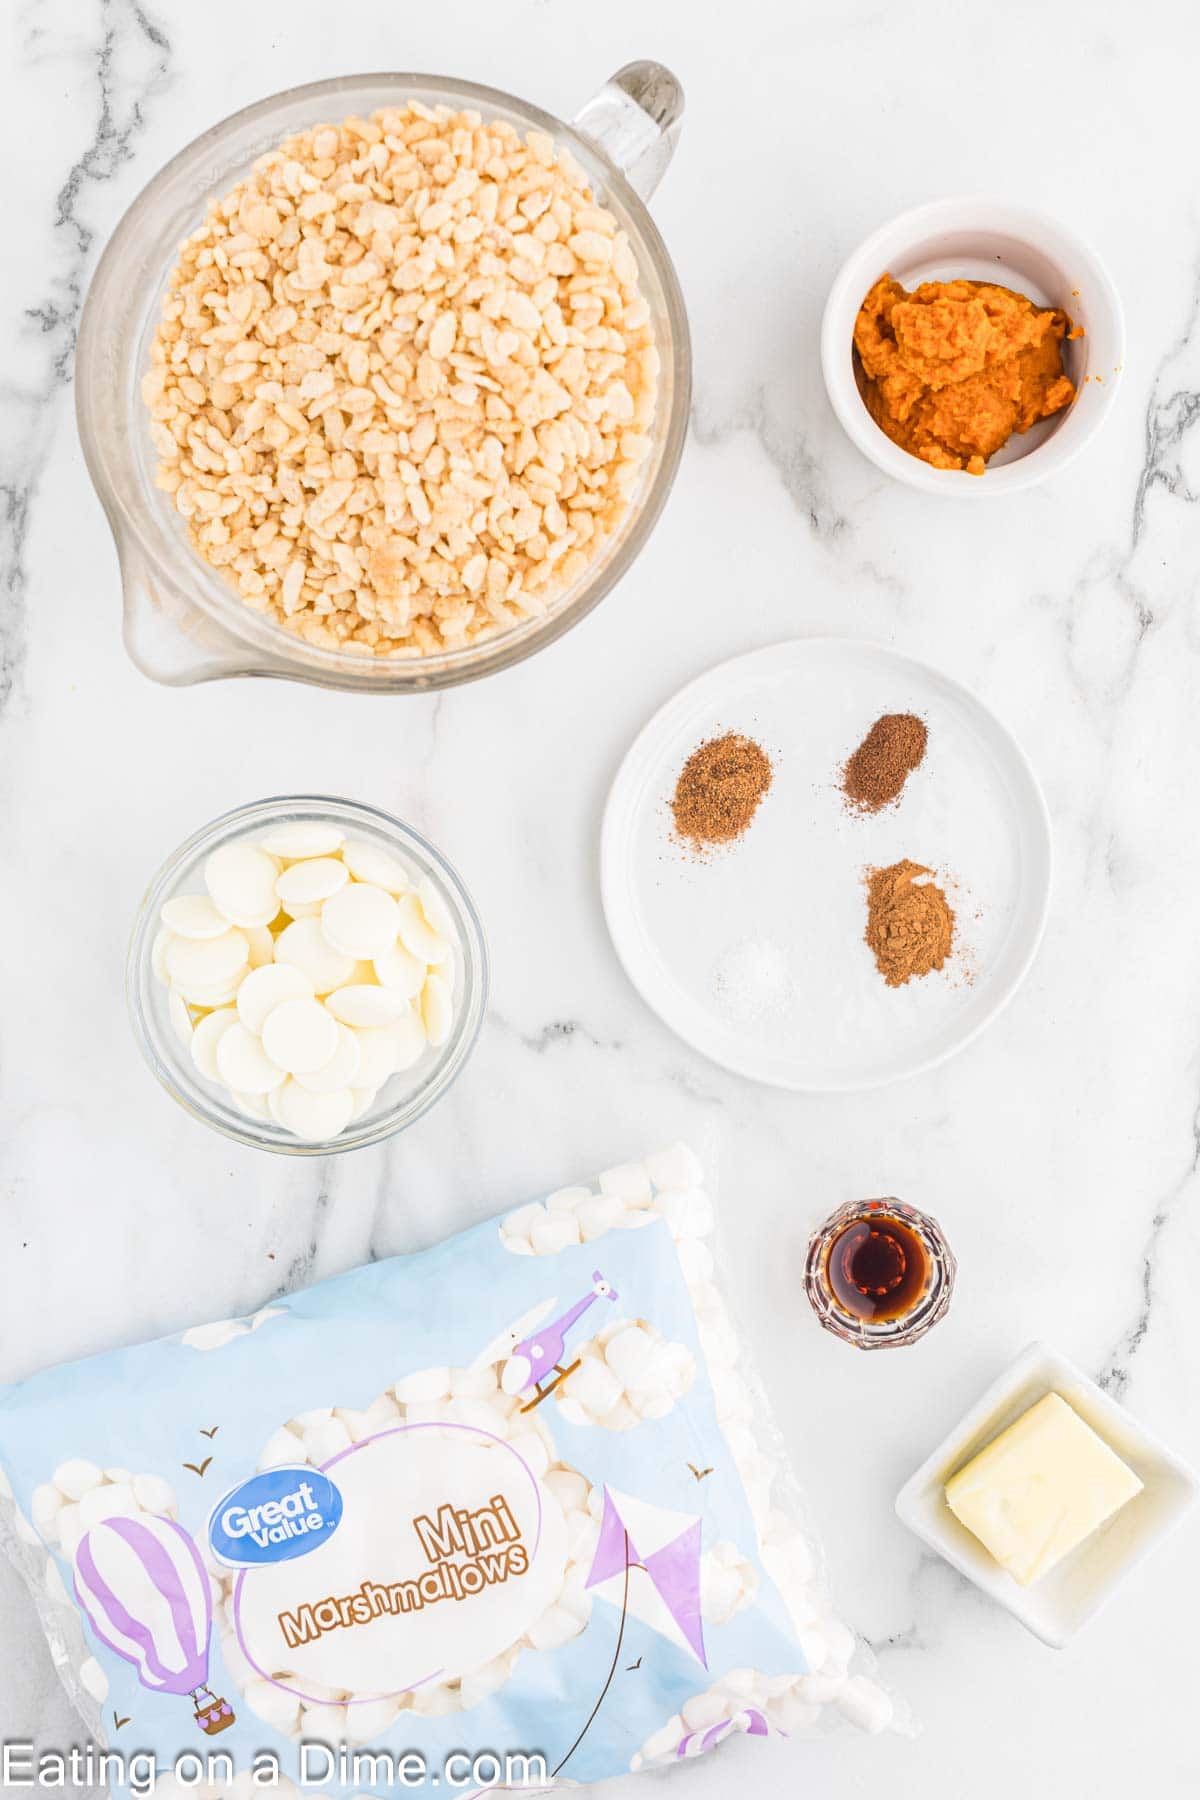 A marble surface displays ingredients for pumpkin rice krispie treats: a mixing bowl of rice cereal, a small white bowl of white chocolate chips, a package of mini marshmallows, a white plate with spices, a bowl of pumpkin puree, a dish with vanilla extract, and a pat of butter.